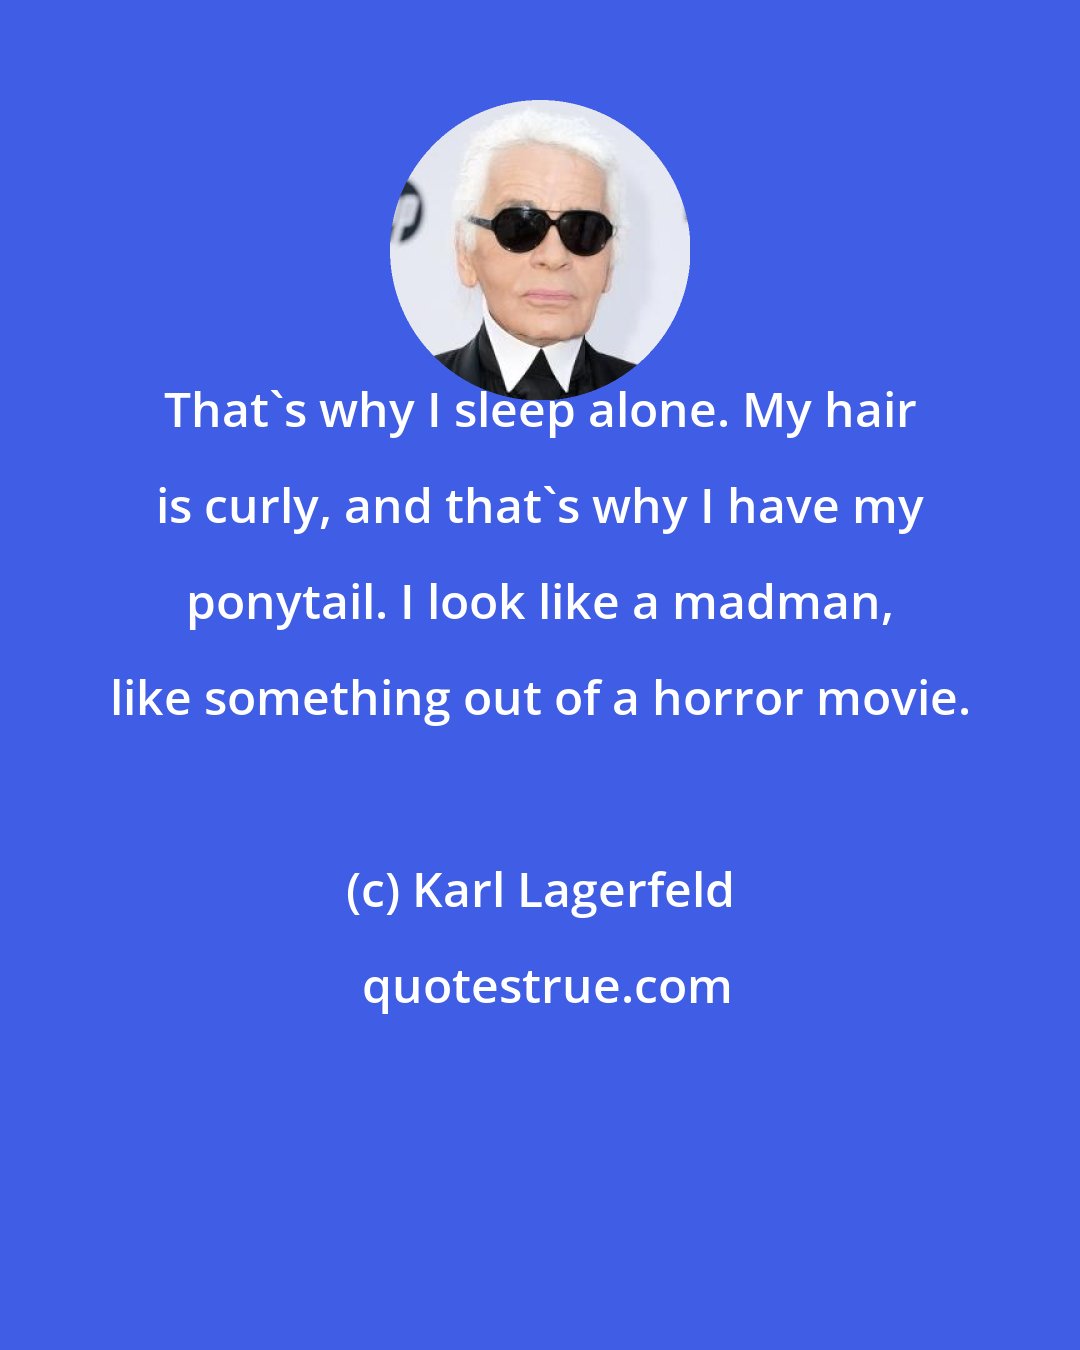 Karl Lagerfeld: That's why I sleep alone. My hair is curly, and that's why I have my ponytail. I look like a madman, like something out of a horror movie.